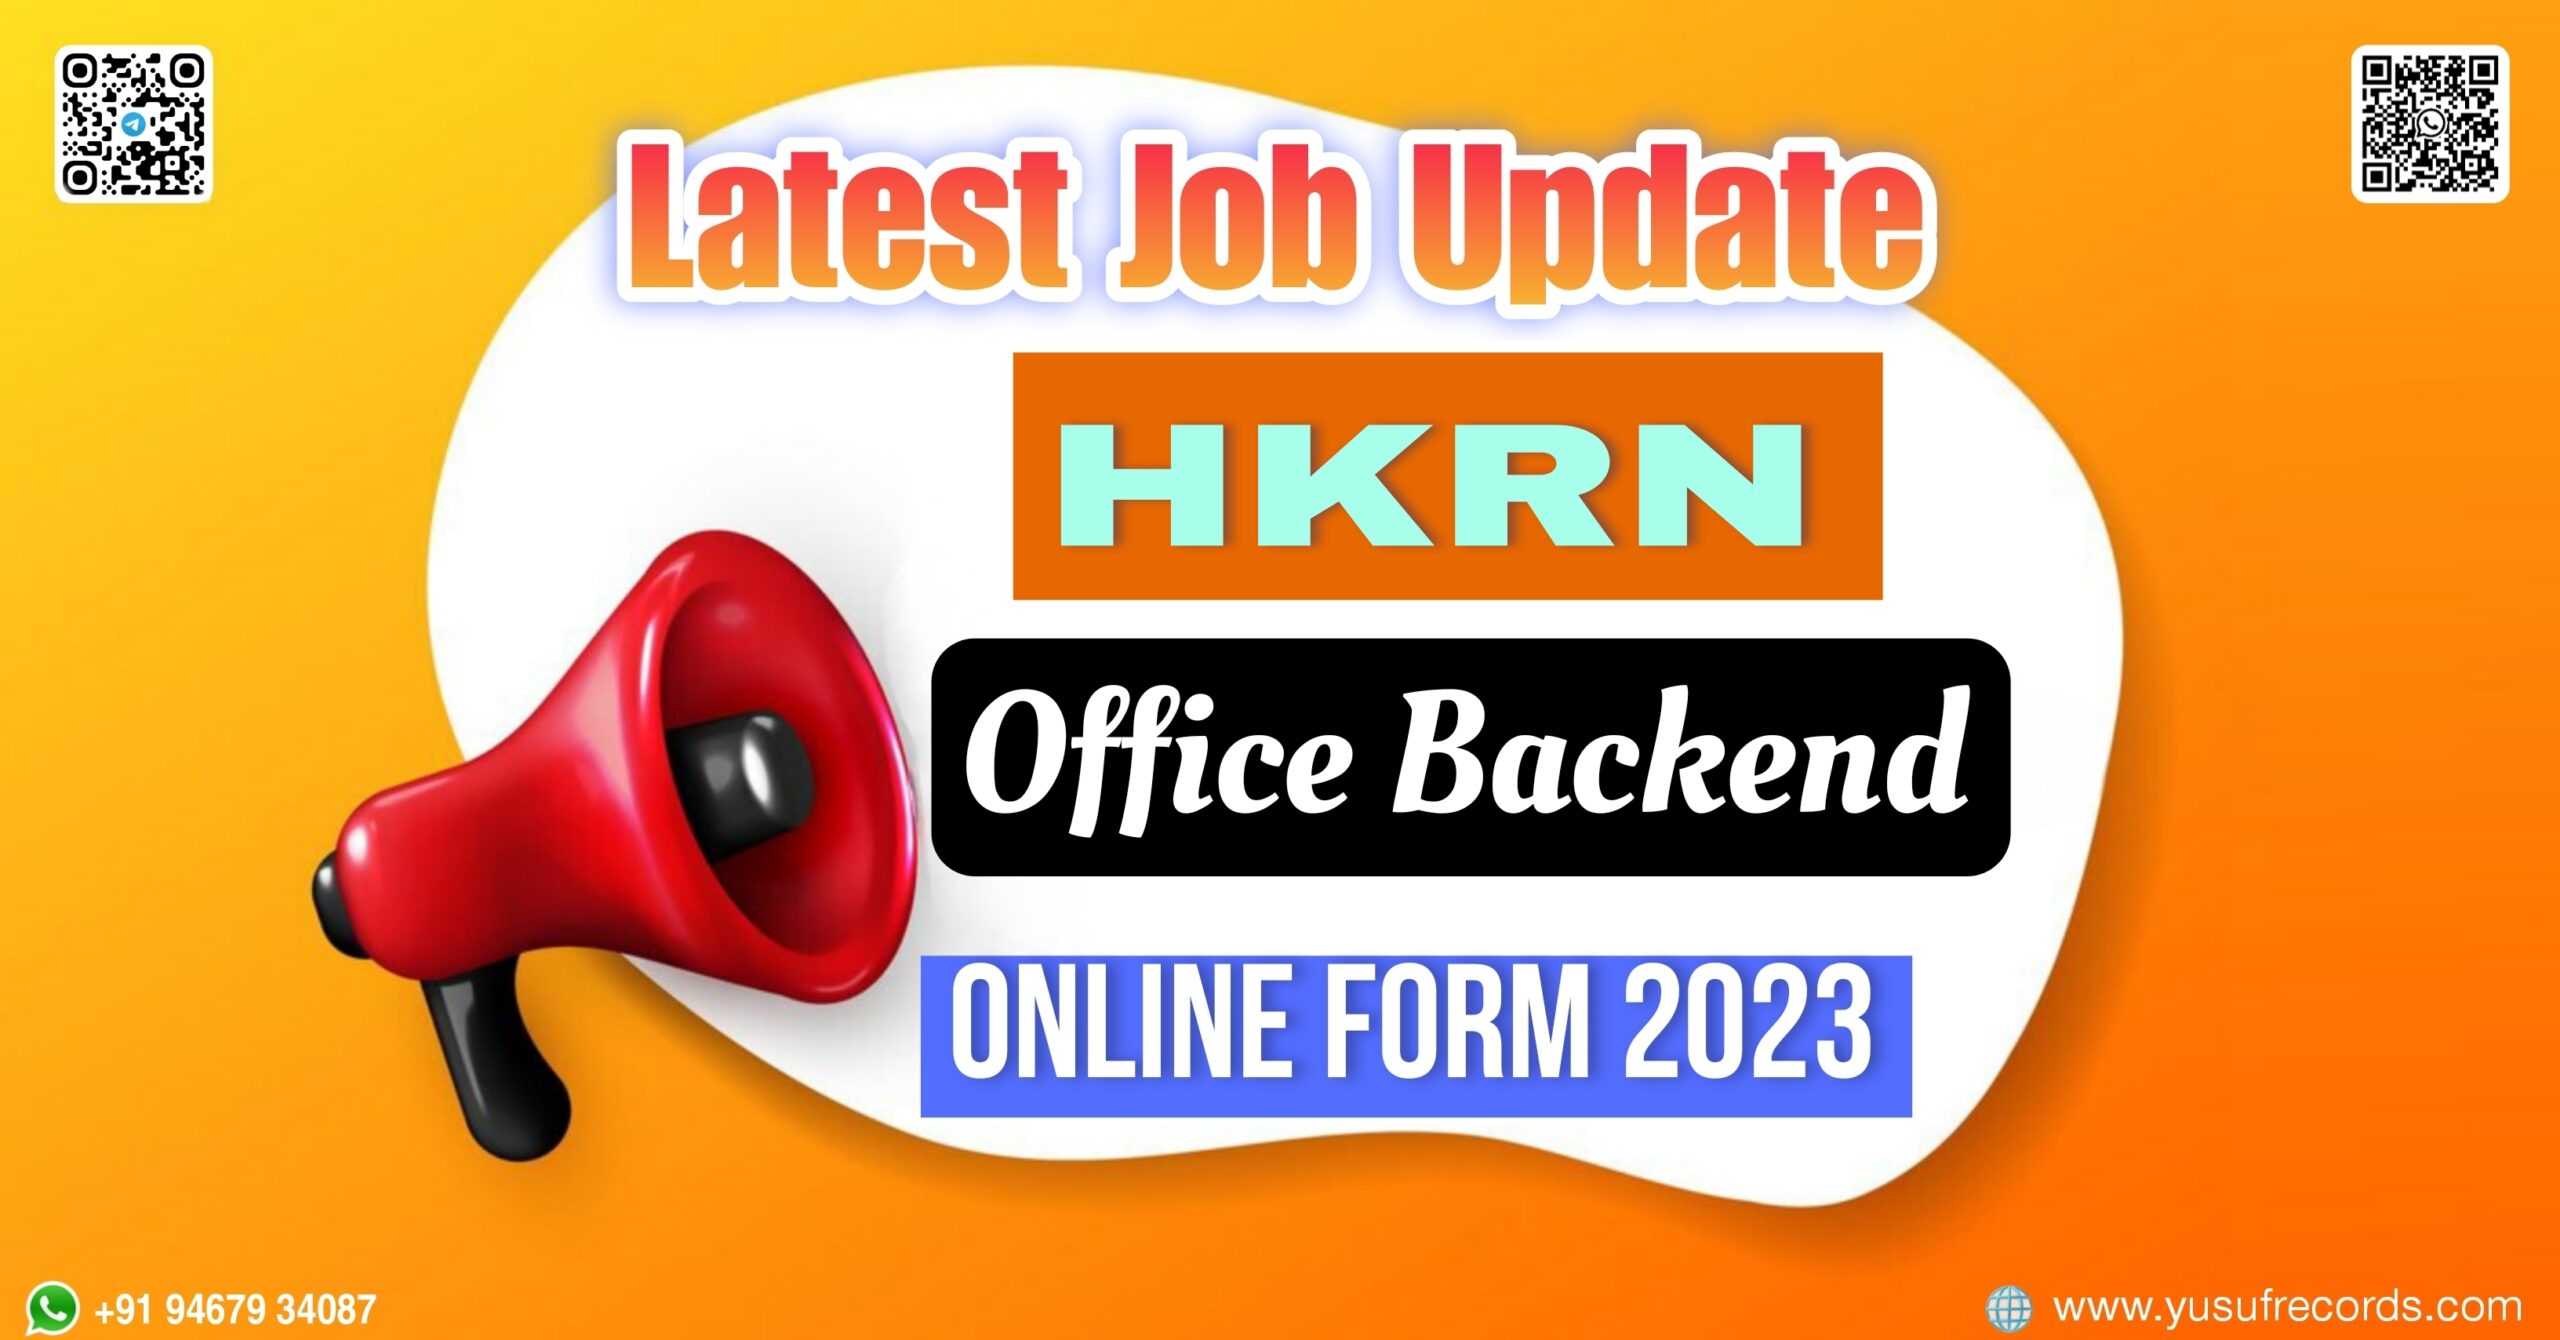 HKRN Office Backend Online Form 2023 yusufrecords.com